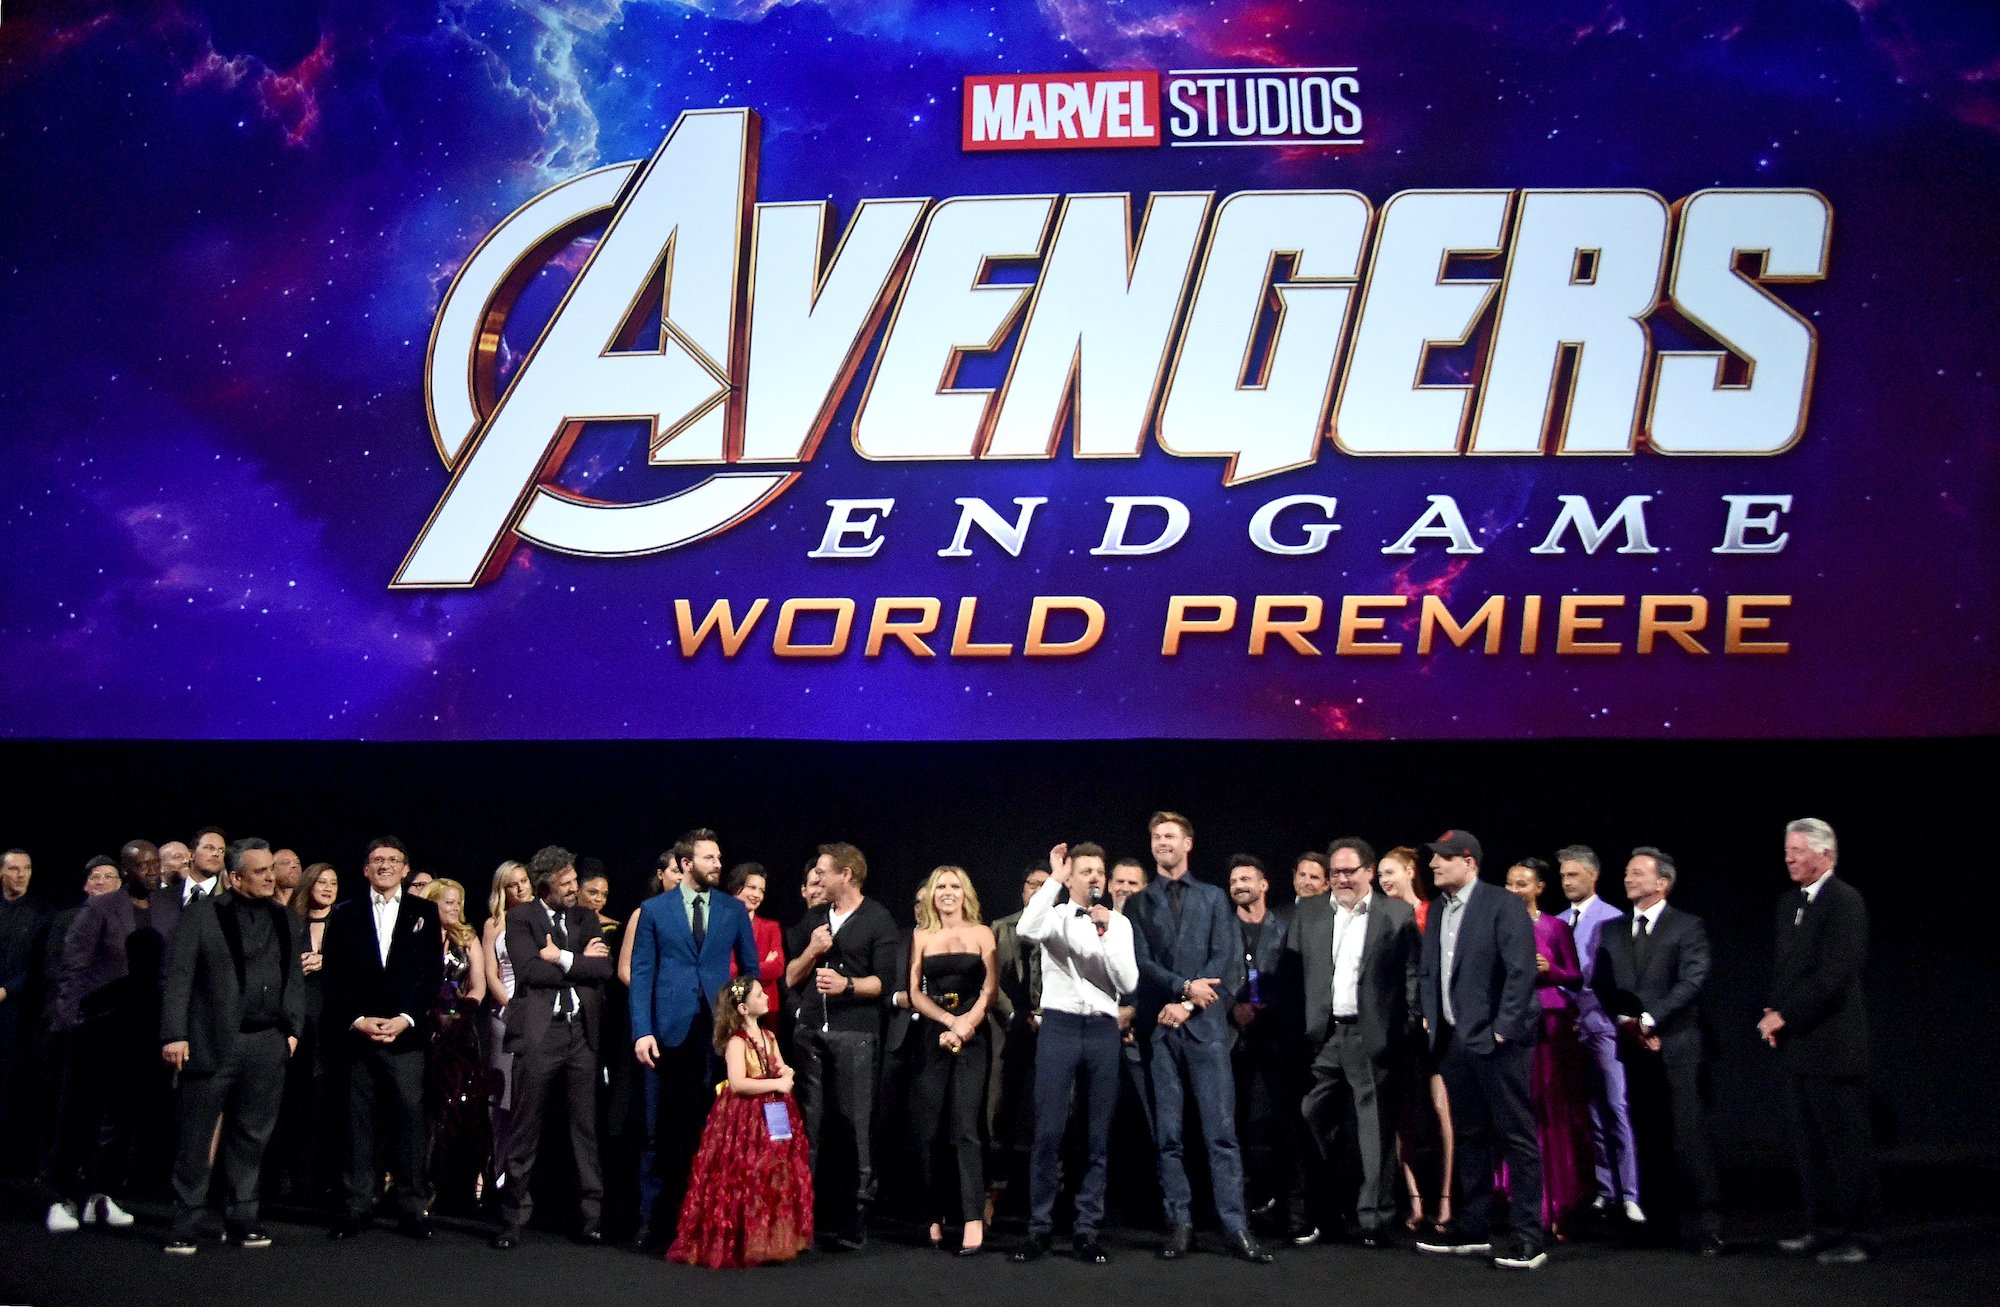 Cast and crew of 'Avengers: Endgame'